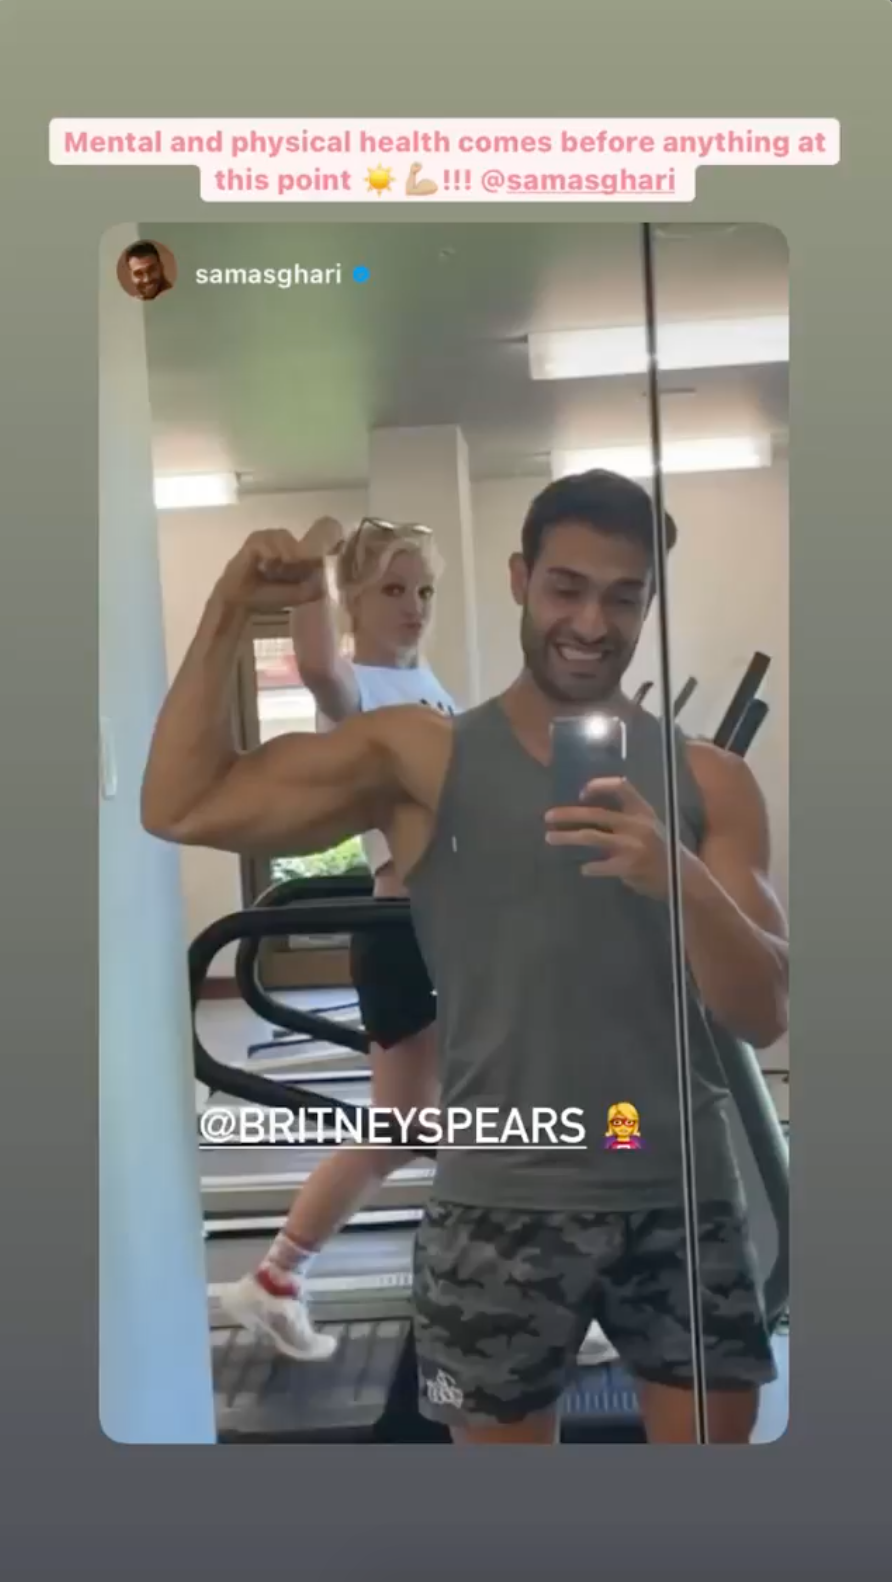 Britney Spears and Sam Asghari working out 